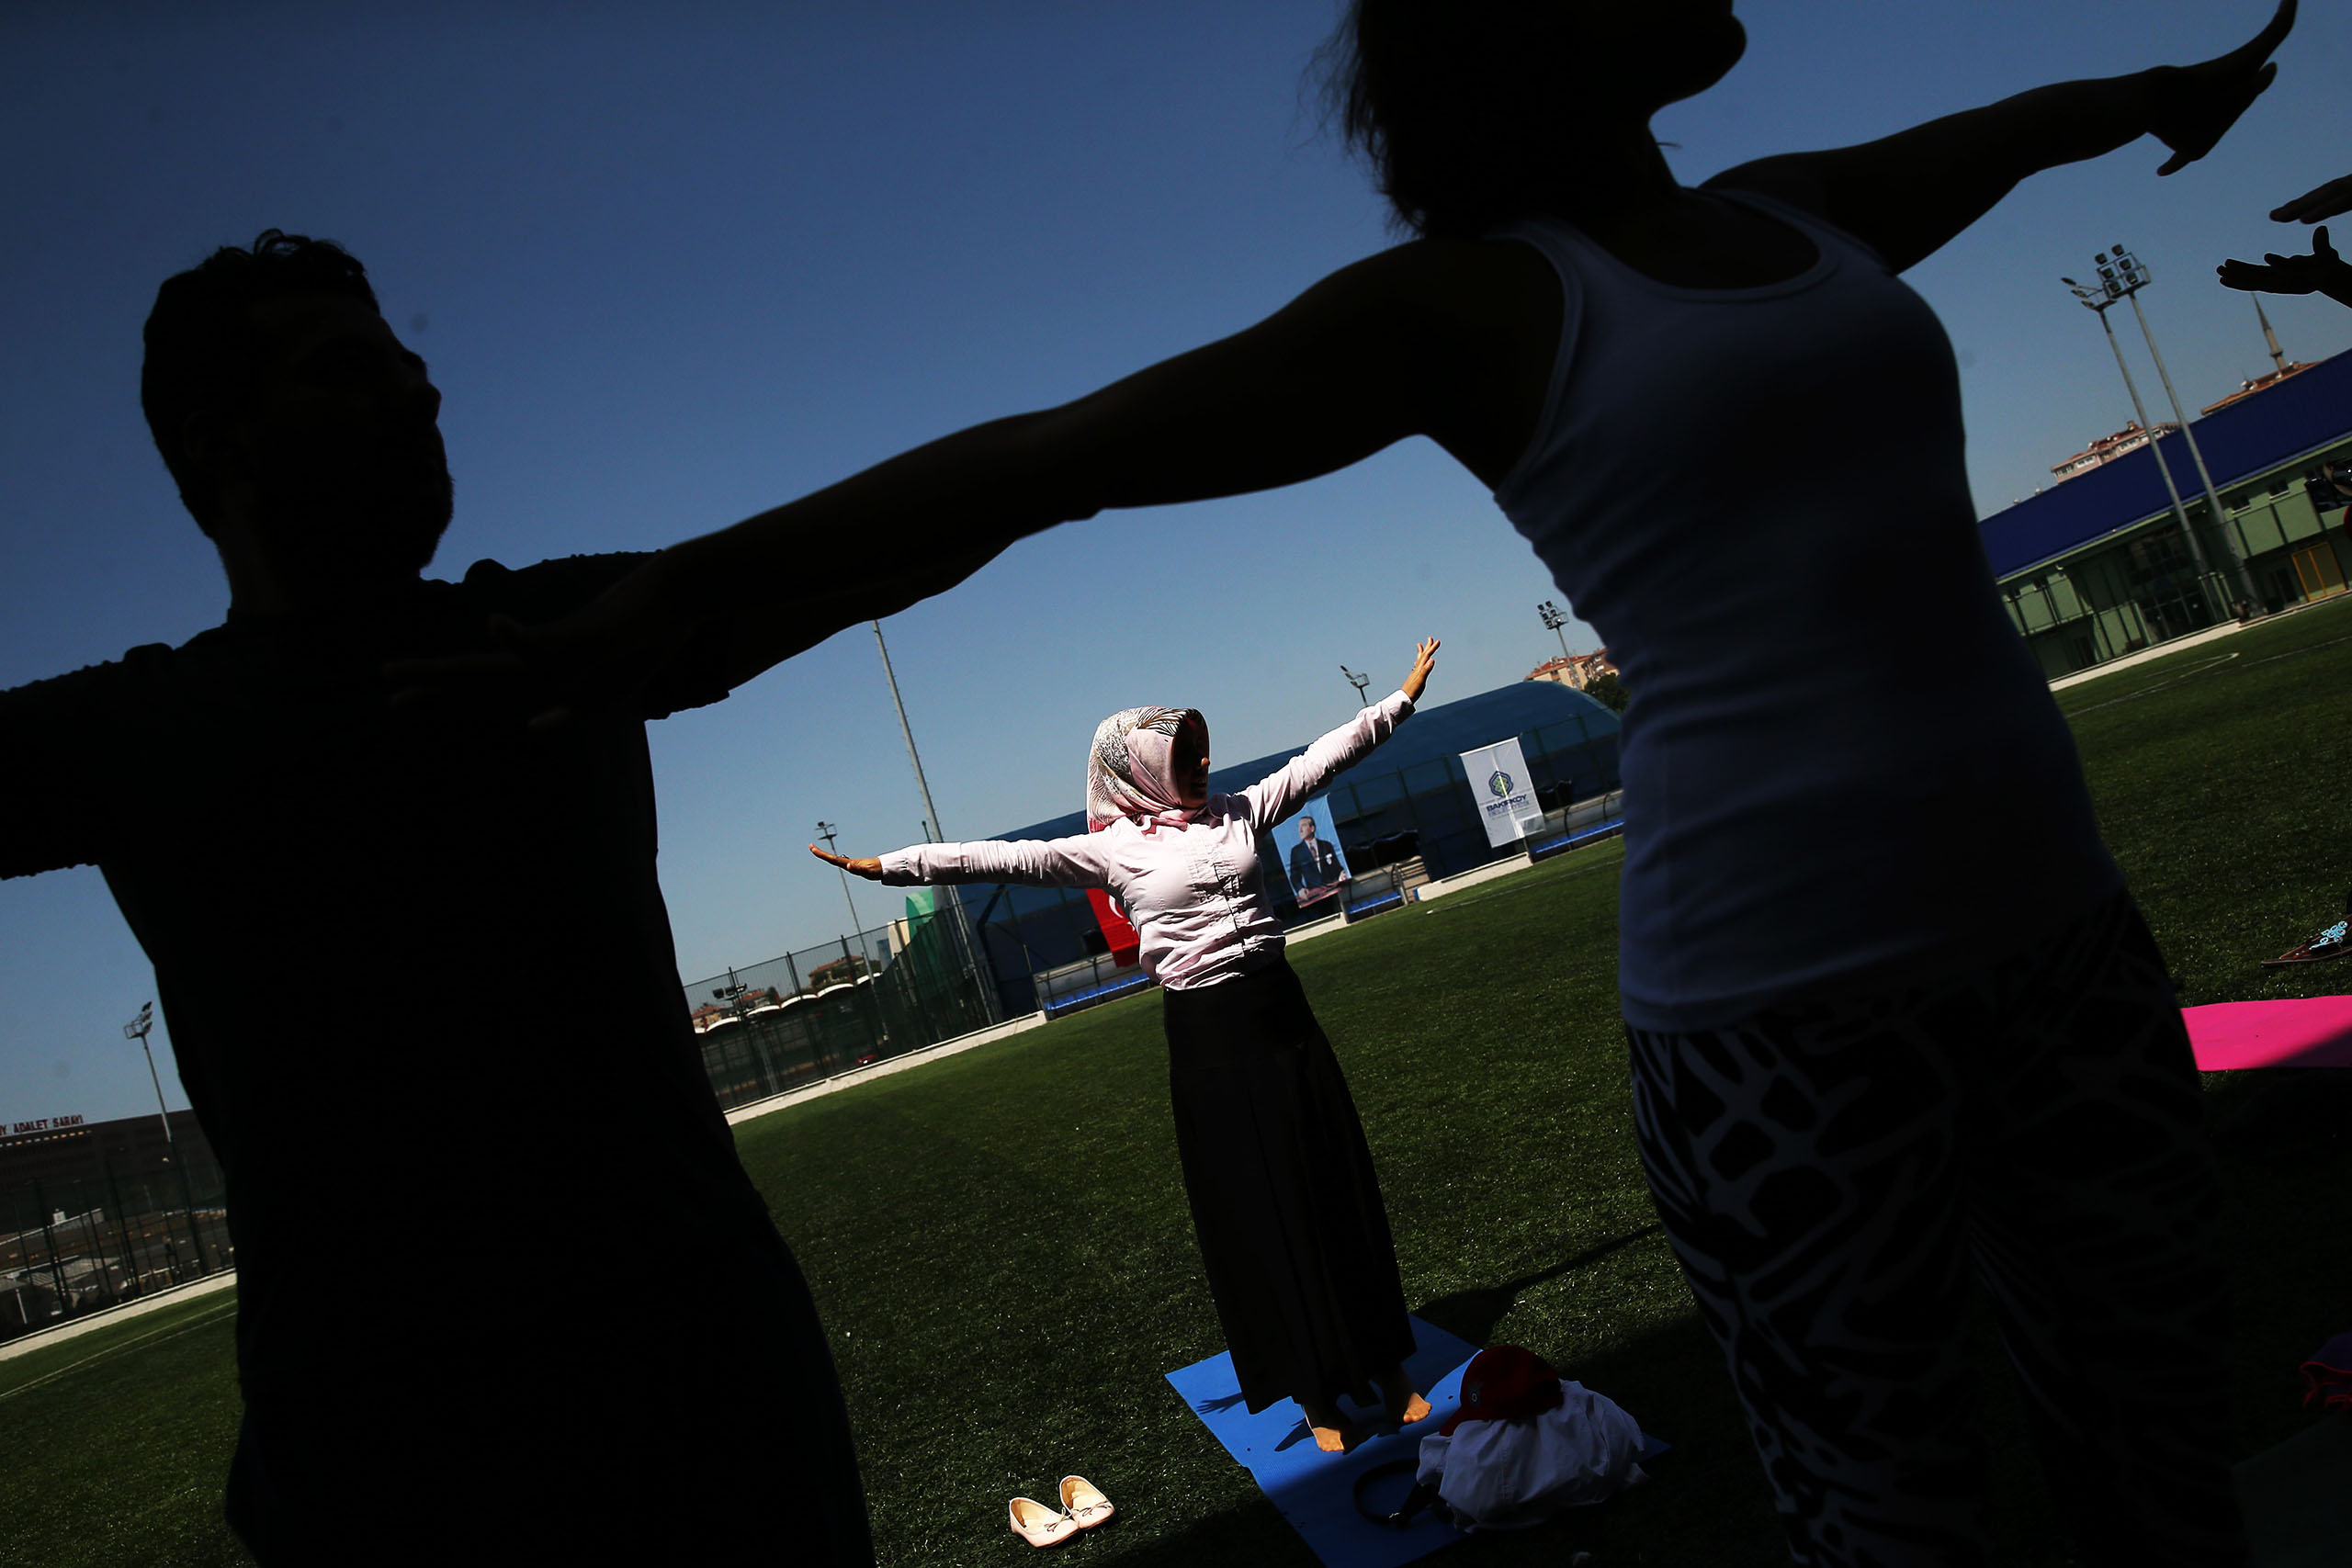 People perform yoga exercises during an event to mark the World Yoga Day 2016 at Bakirkoy Botanik Park in Istanbul, Turkey, on June 21, 2016.